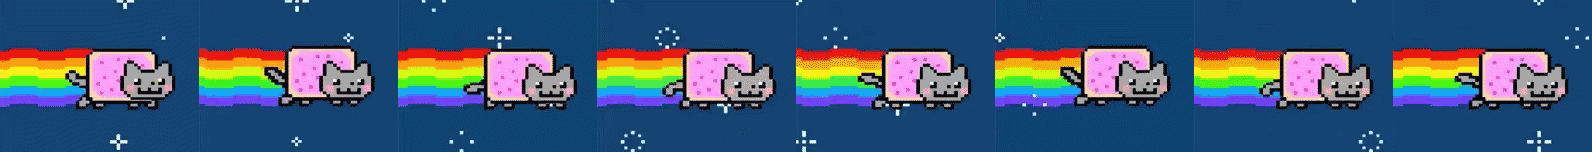 In this example, we load a GIF of the Nyan Cat and extract all frames as a series of images from it. The GIF contains 8 sprites and we process them in order (from the first to the last). In the sprite sheet size options, we only specify the rows value and set it equal to 1. This way, we get a single horizontal sprite strip with all eight animation frames one after another. Also, to see the entire GIF, we animate it at the speed of 200 milliseconds per frame (which equals 1000/200 = 5 frames per second). GIF source: Giphy.